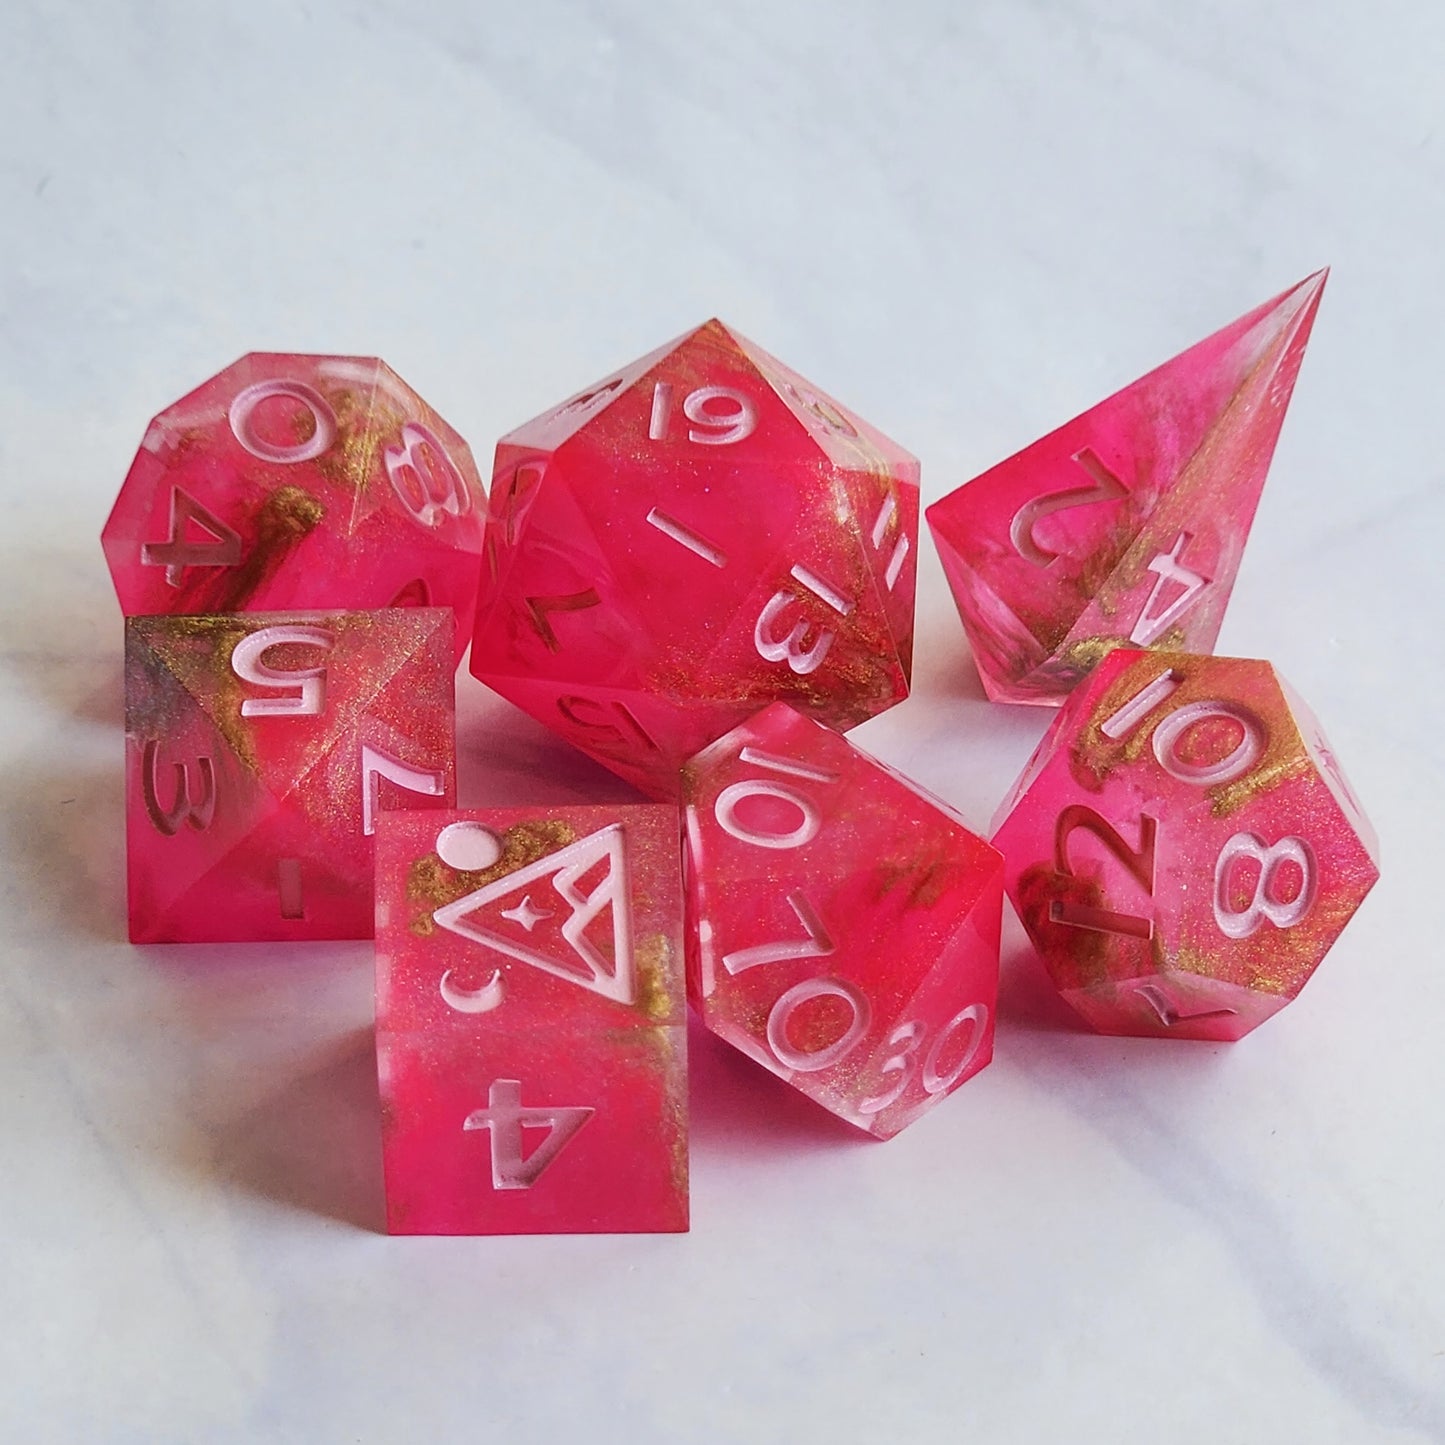 Let's Go Party (In Pink) 7pc Dice Set